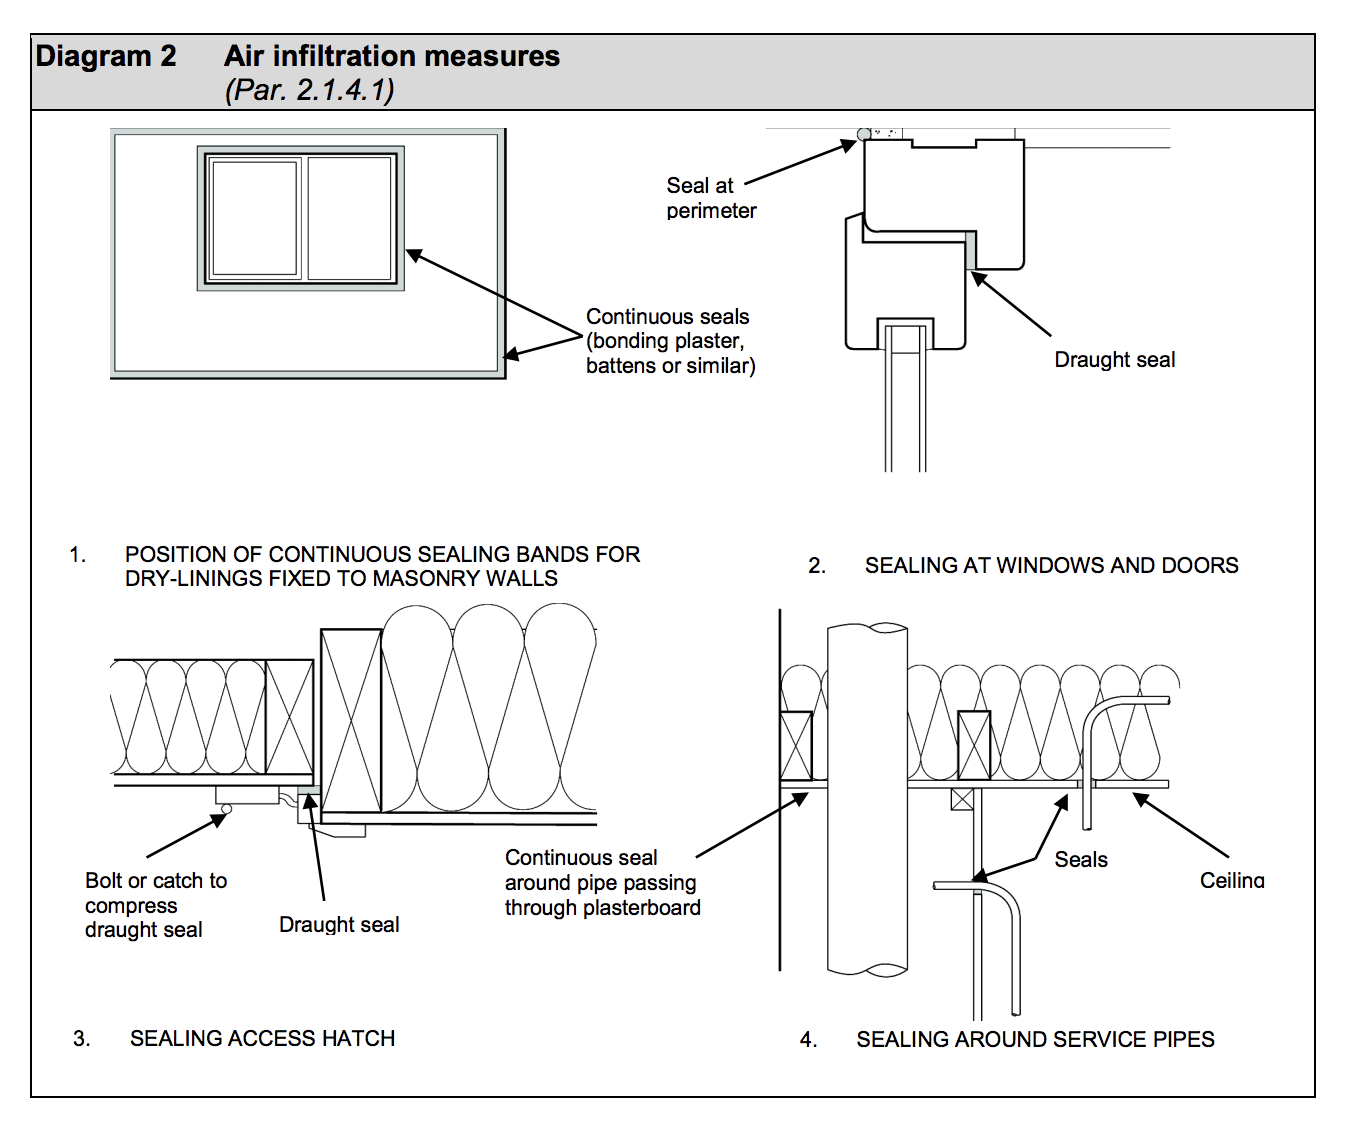 Diagram HL2 - Air infiltration measures - Extract from TGD L